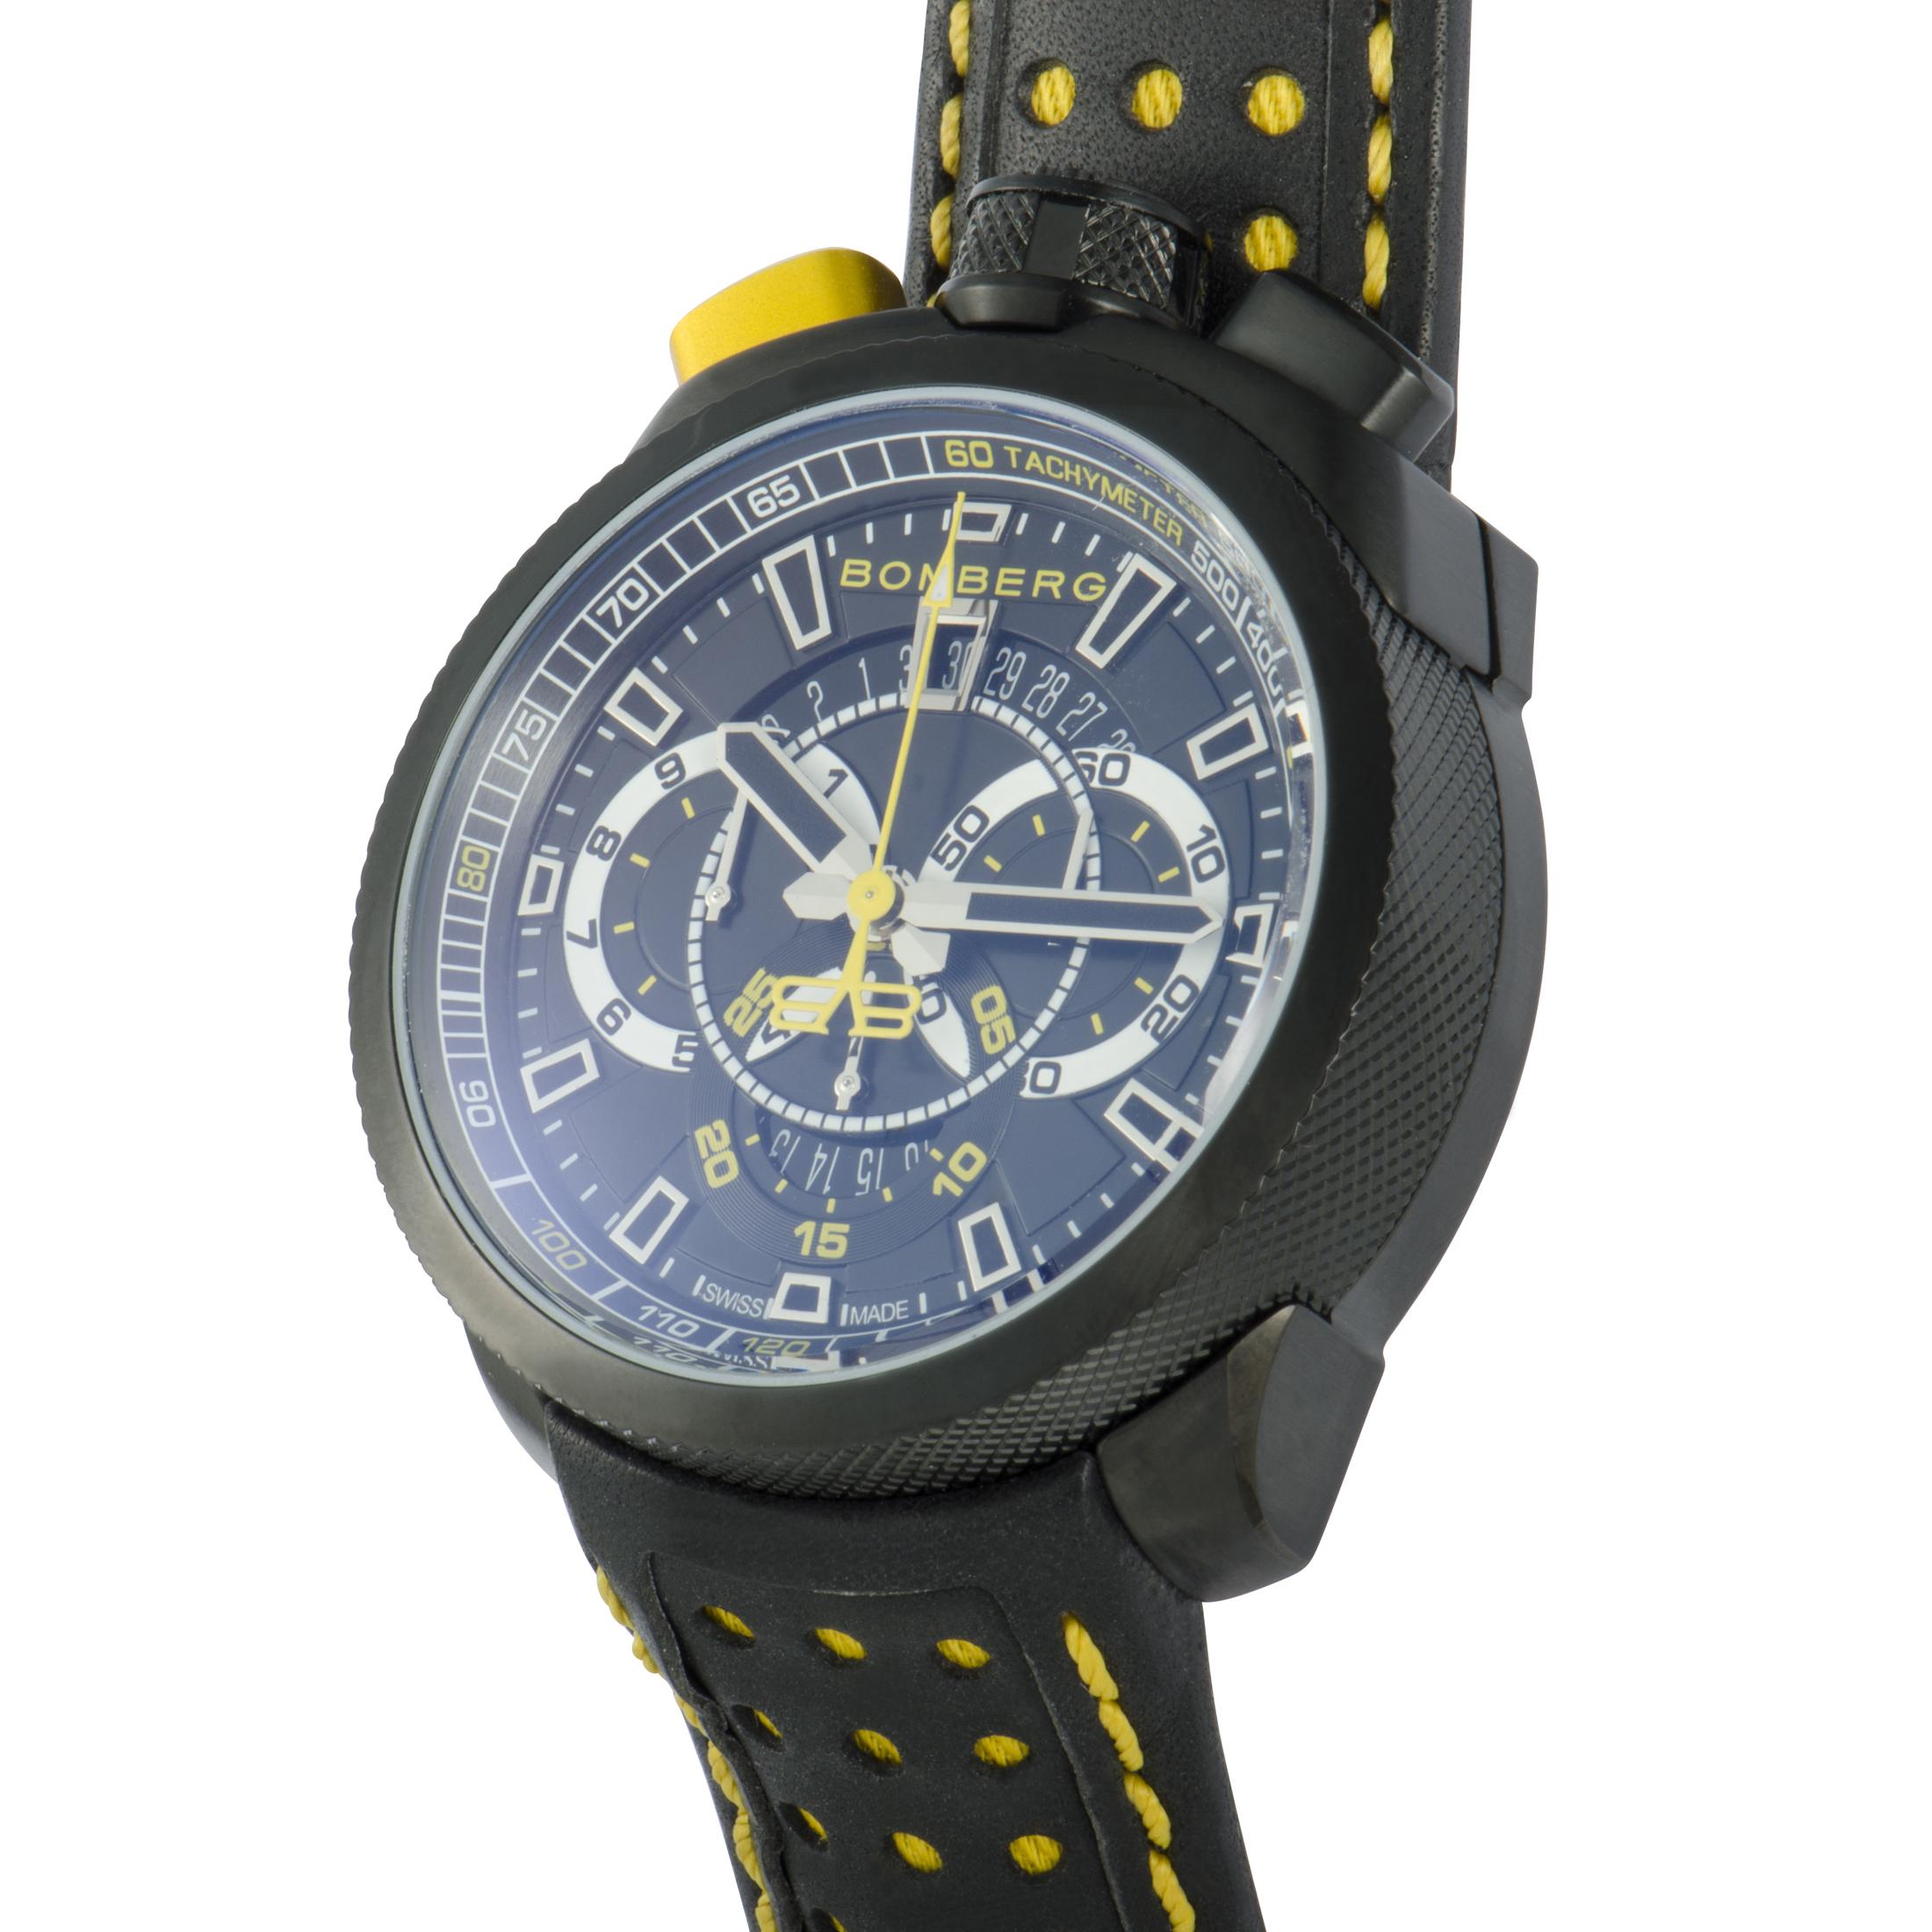 This is the Bomberg Bolt-68, reference number BS45CHPBA.015.3.

It is presented with a 45 mm black PVD-coated stainless steel case that is mounted onto a black leather strap fitted with a tang buckle, but can also be worn on a chain. The watch is